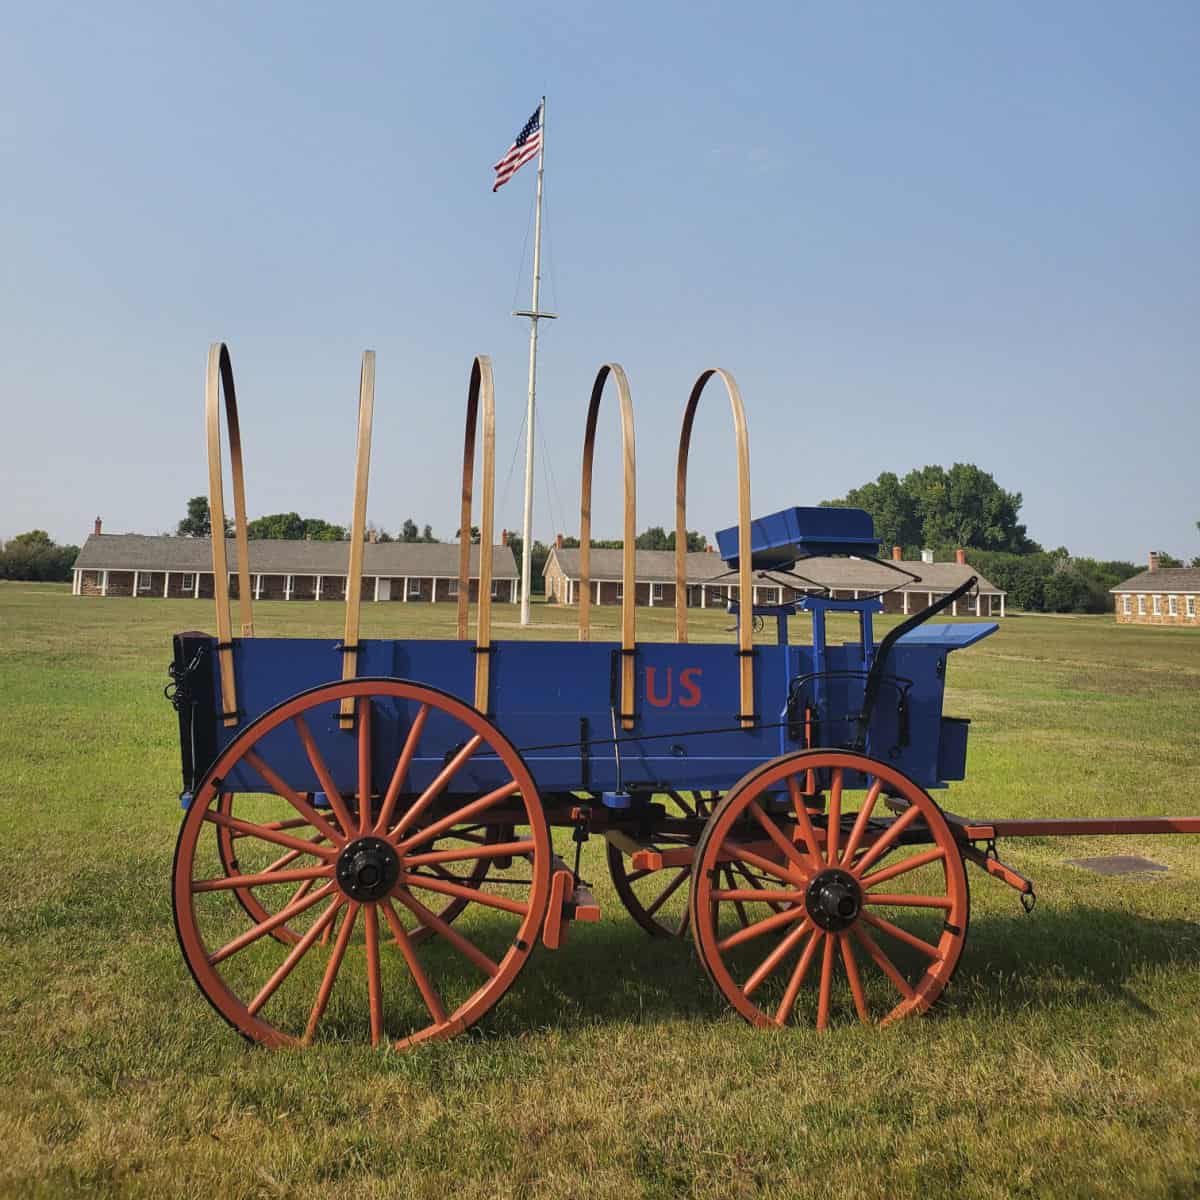 Historic horse drawn wagon by a flag pole on the grounds of Fort Larned NHS